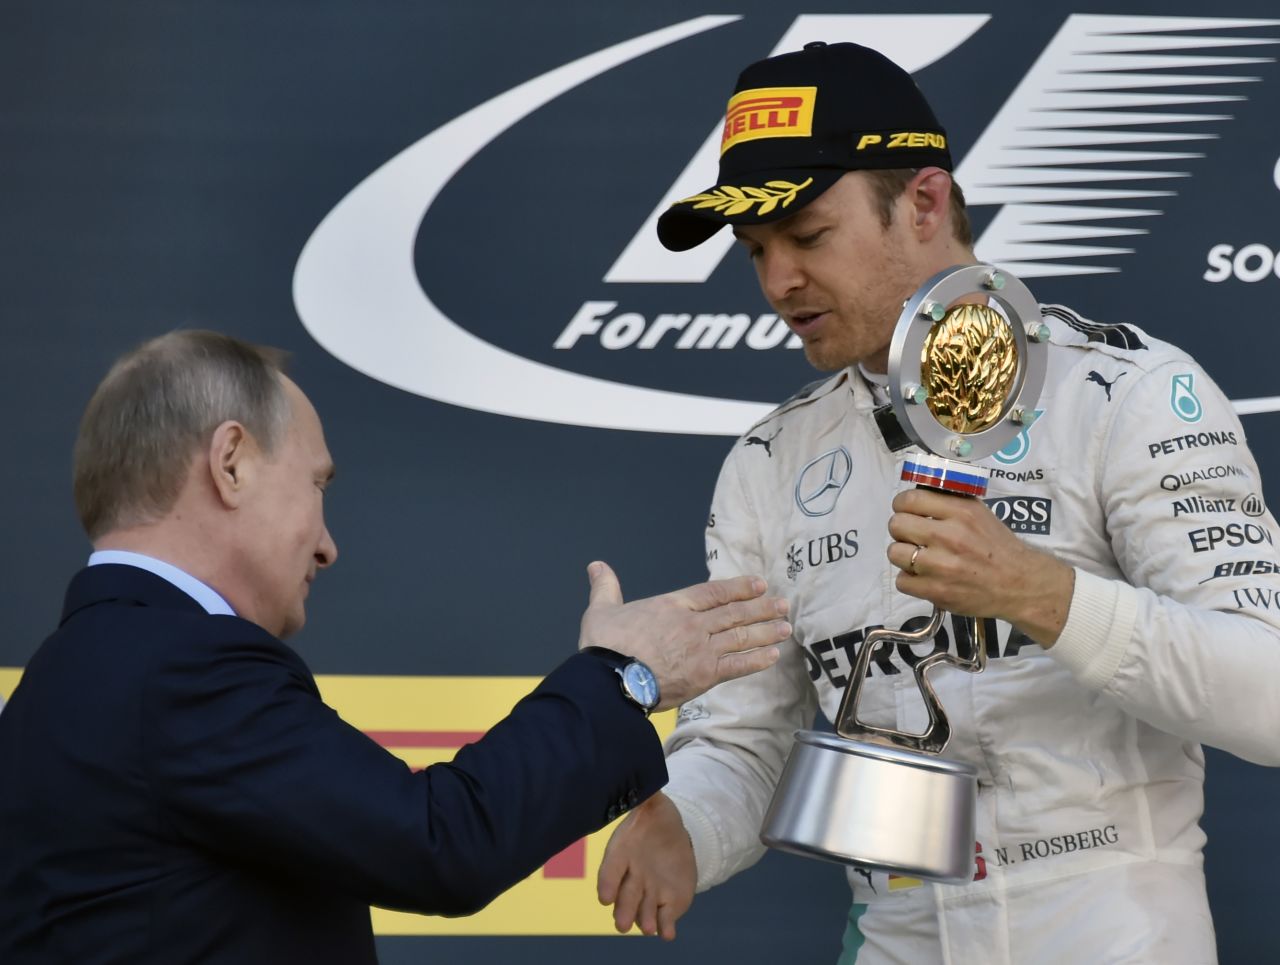 President Vladimir Putin was on the podium to hand out the victory laurels to Rosberg once more. Another engine problem left Hamilton back in second as his teammate <a href="http://cnn.com/2016/05/01/motorsport/russian-grand-prix-sochi-lewis-hamilton-nico-rosberg/" target="_blank">moved into a 43-point lead.</a>